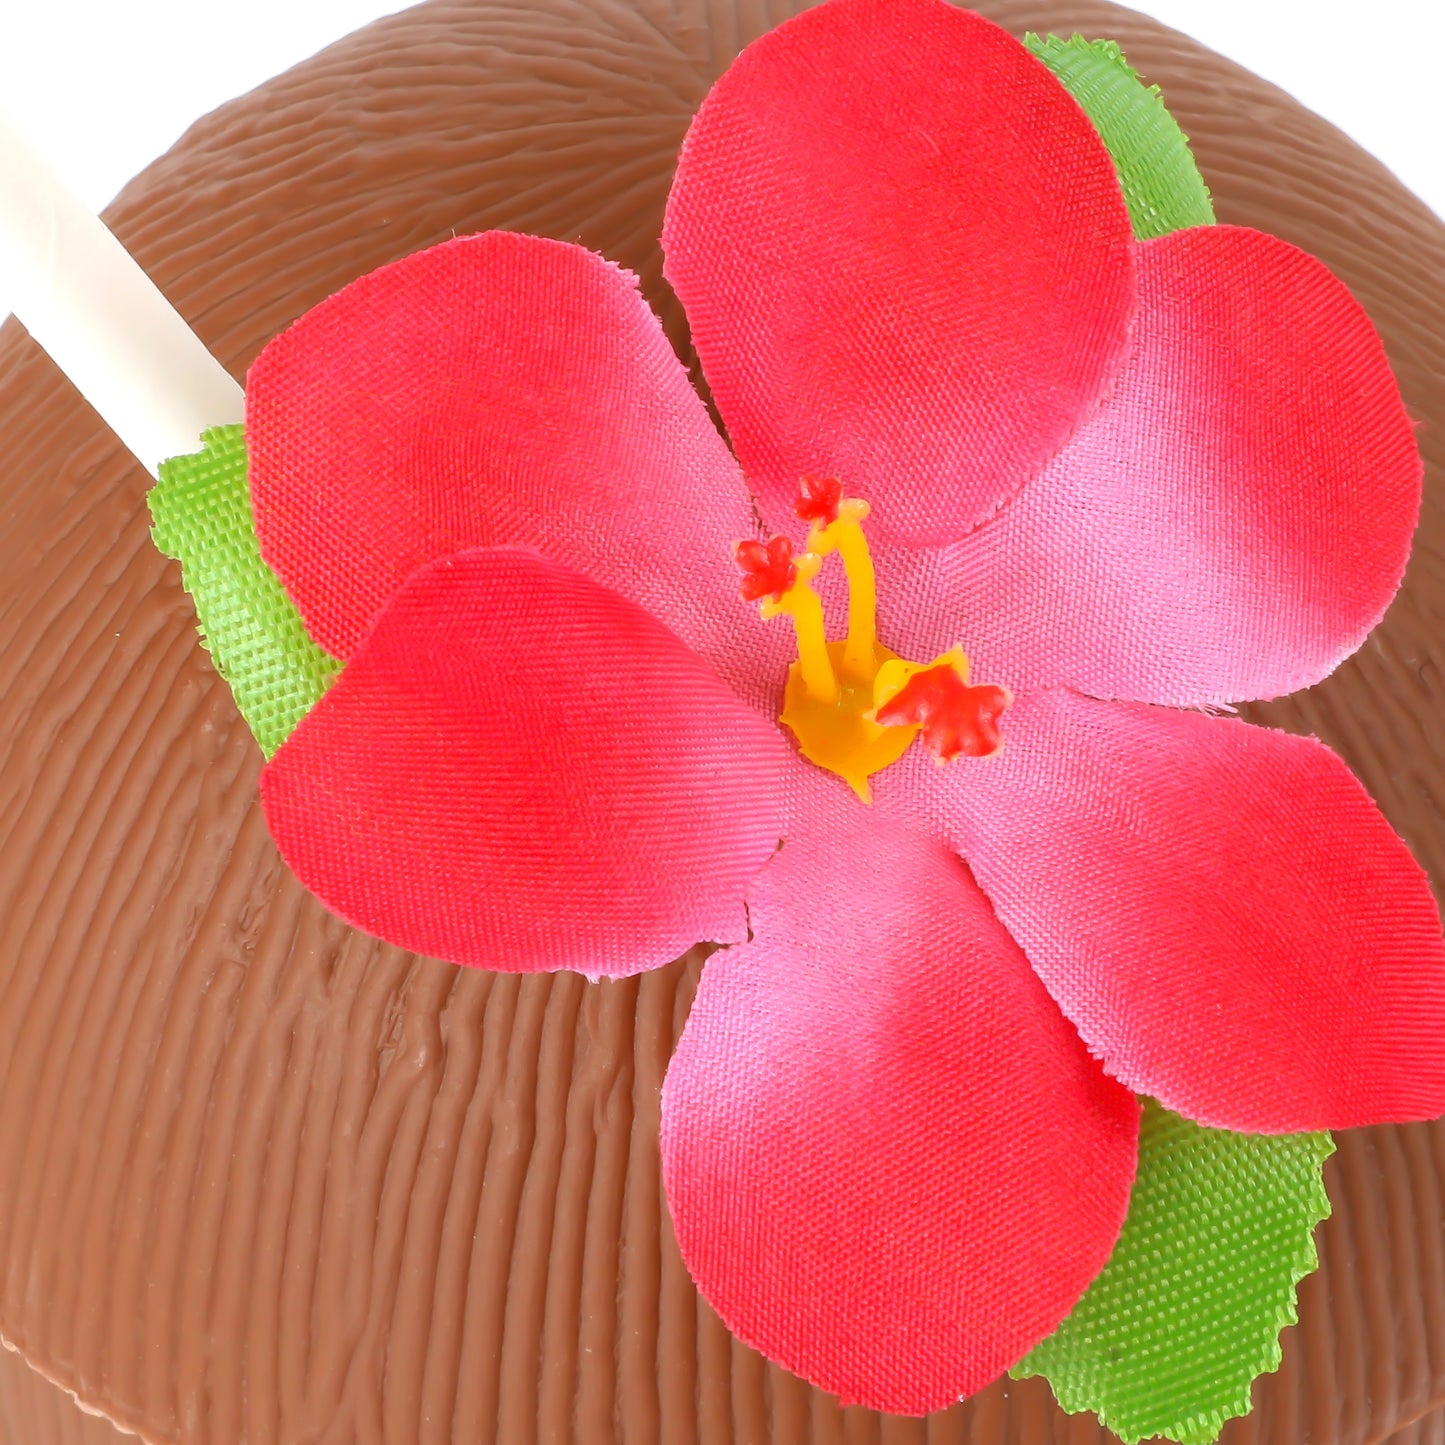 COCONUT CUP WITH RED FLOWER AND PAPER STRAW